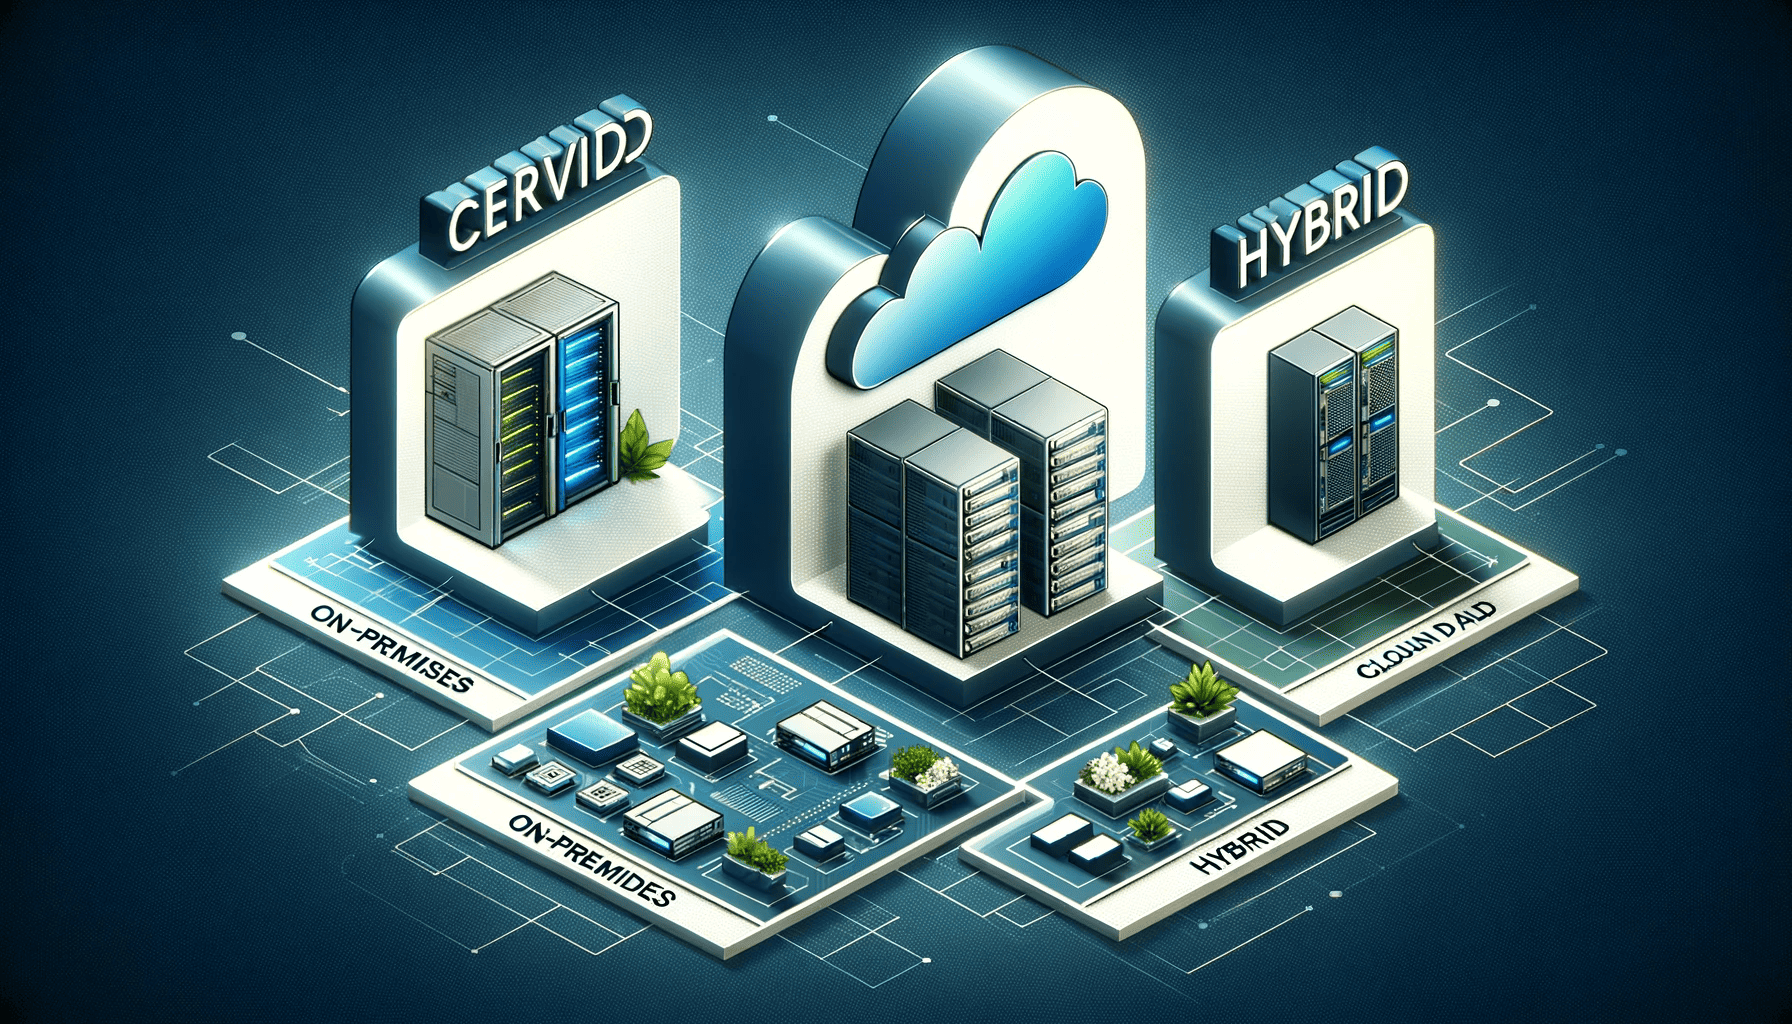 Illustration of diverse server solutions: On-premises, cloud-based, and hybrid systems, depicting their unique characteristics and integration.